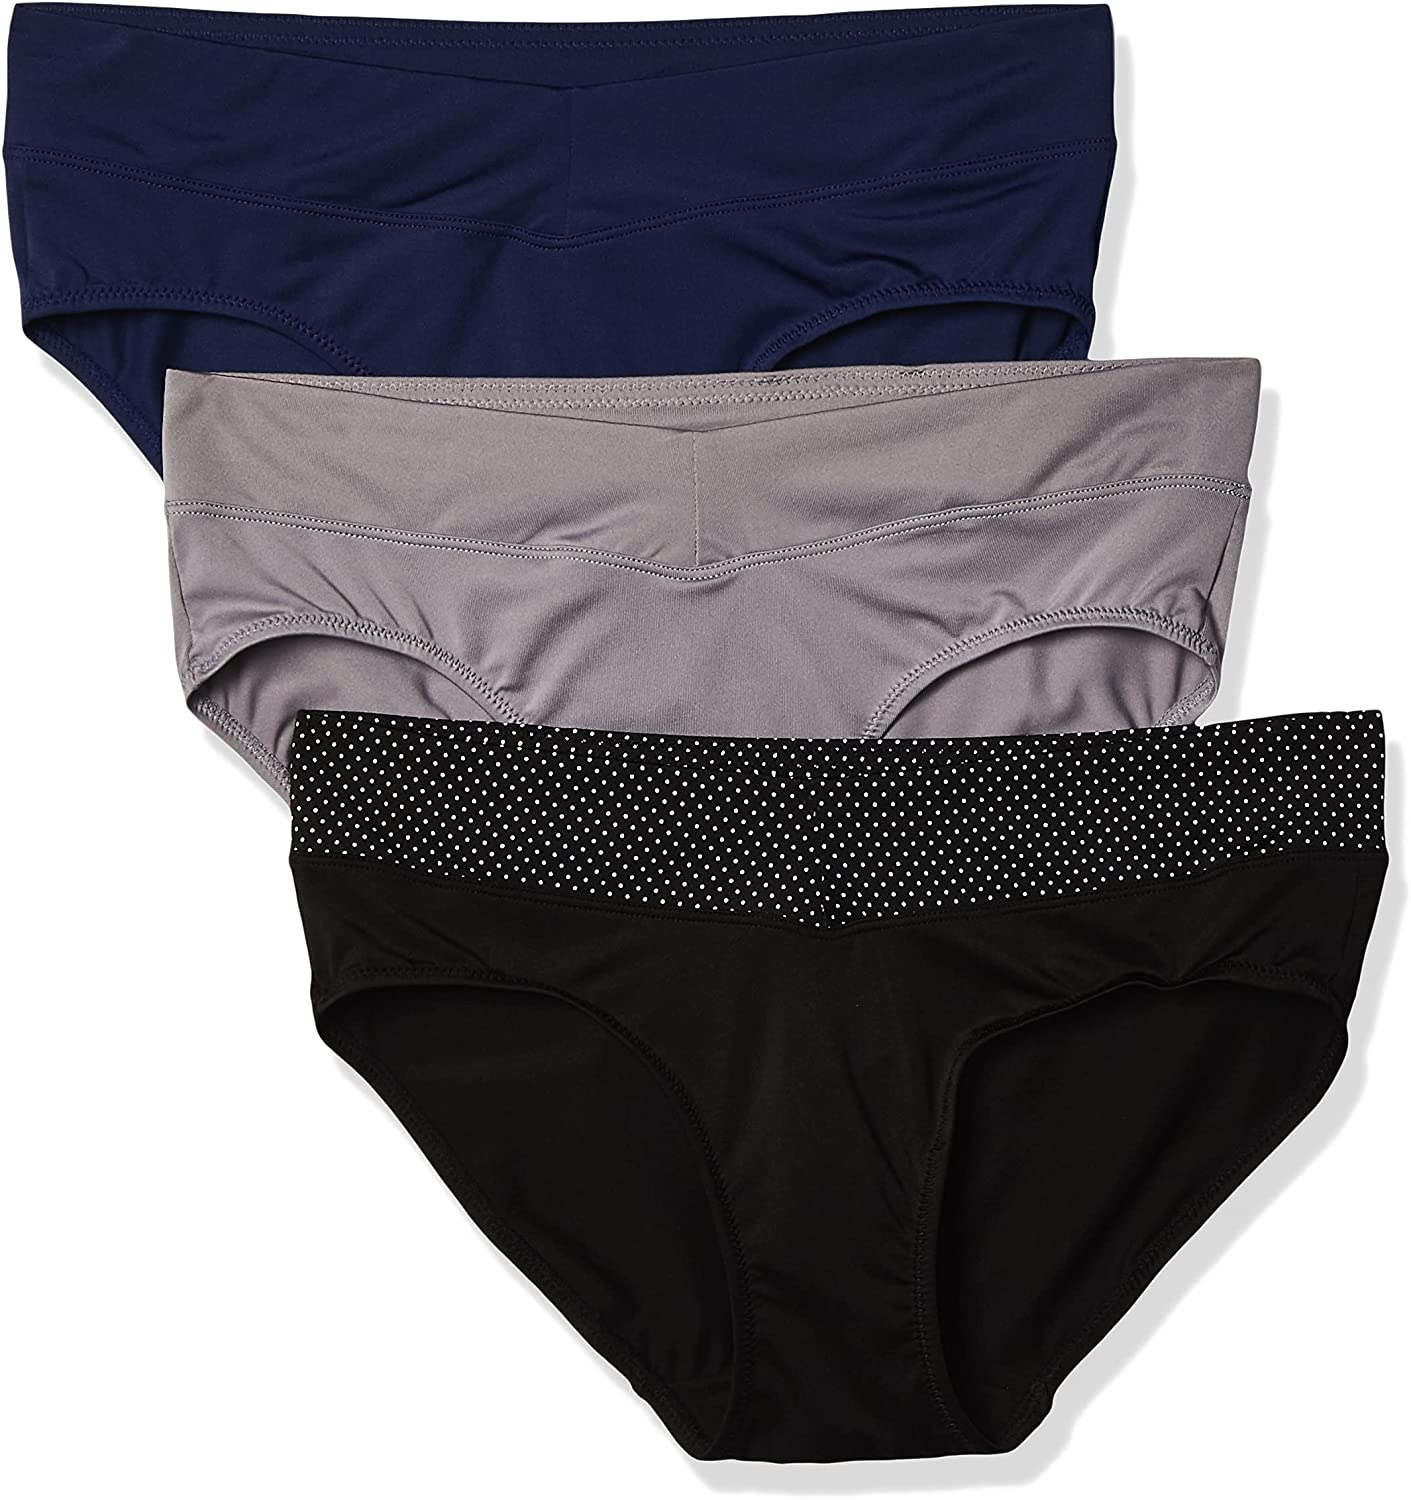 Warners Womens Blissful Benefits No Muffin Top 3 Pack Hipster